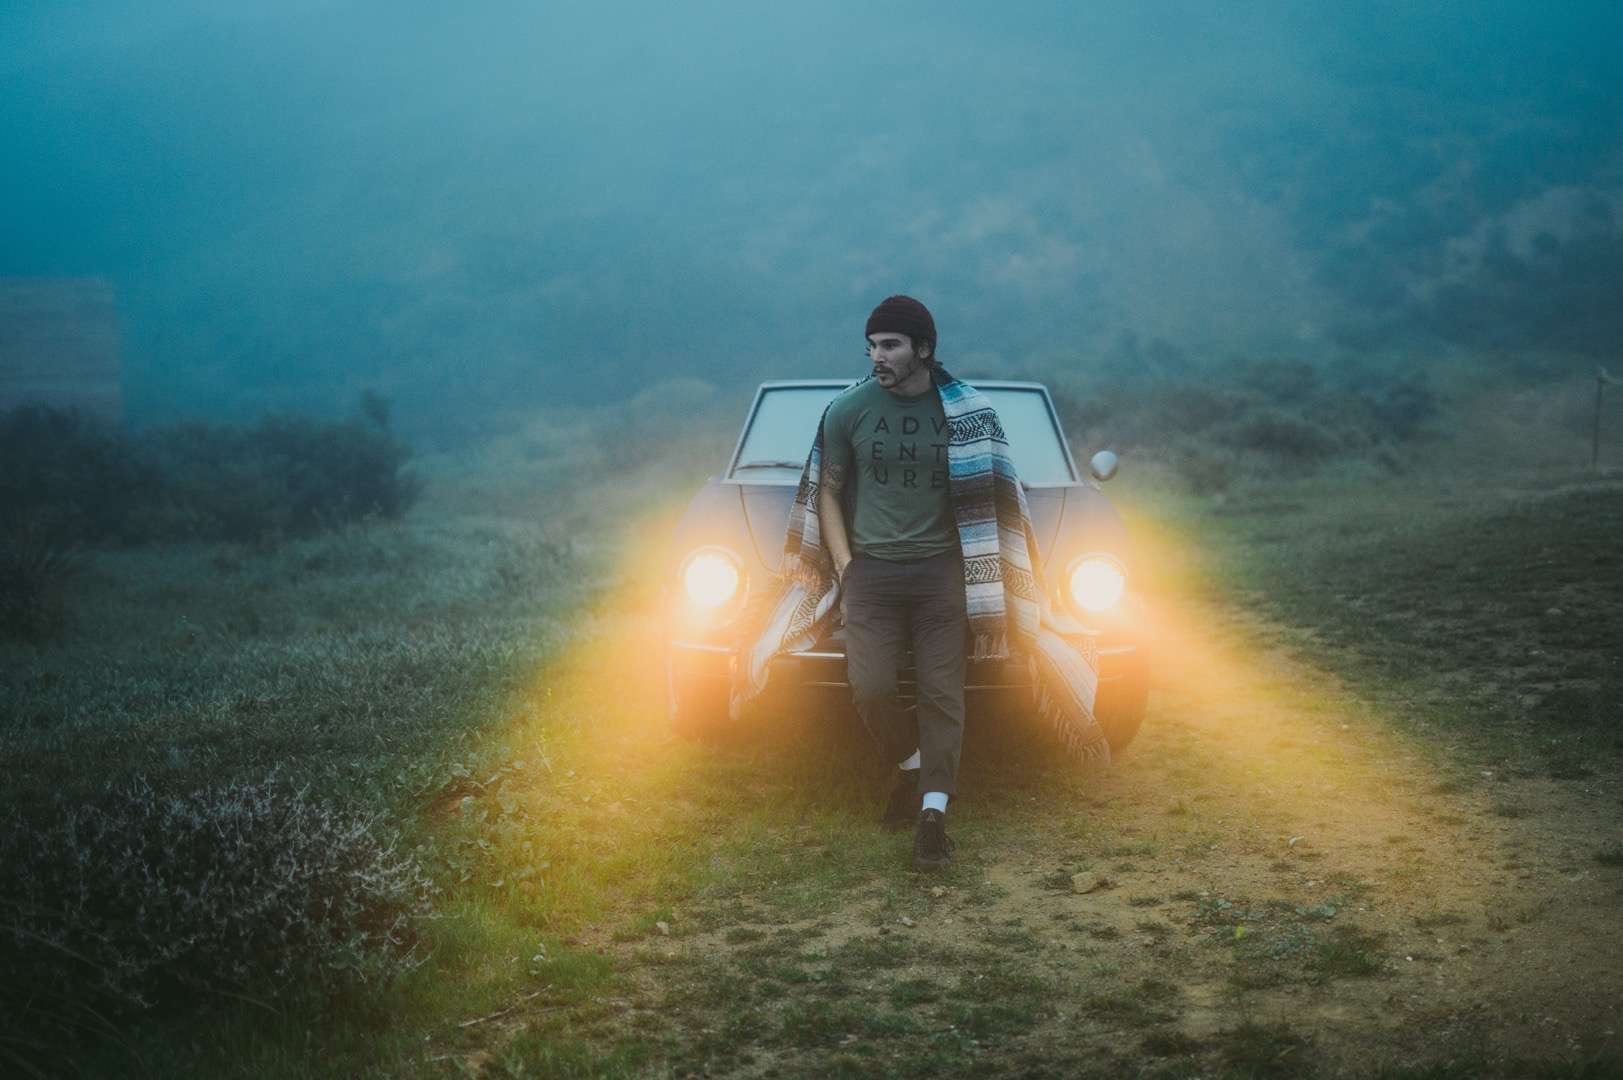 Young man in a clearing at dusk with Indian style blanket draped over shoulders leaning back against the hood of a car with blazing headlights looking off to the distance.